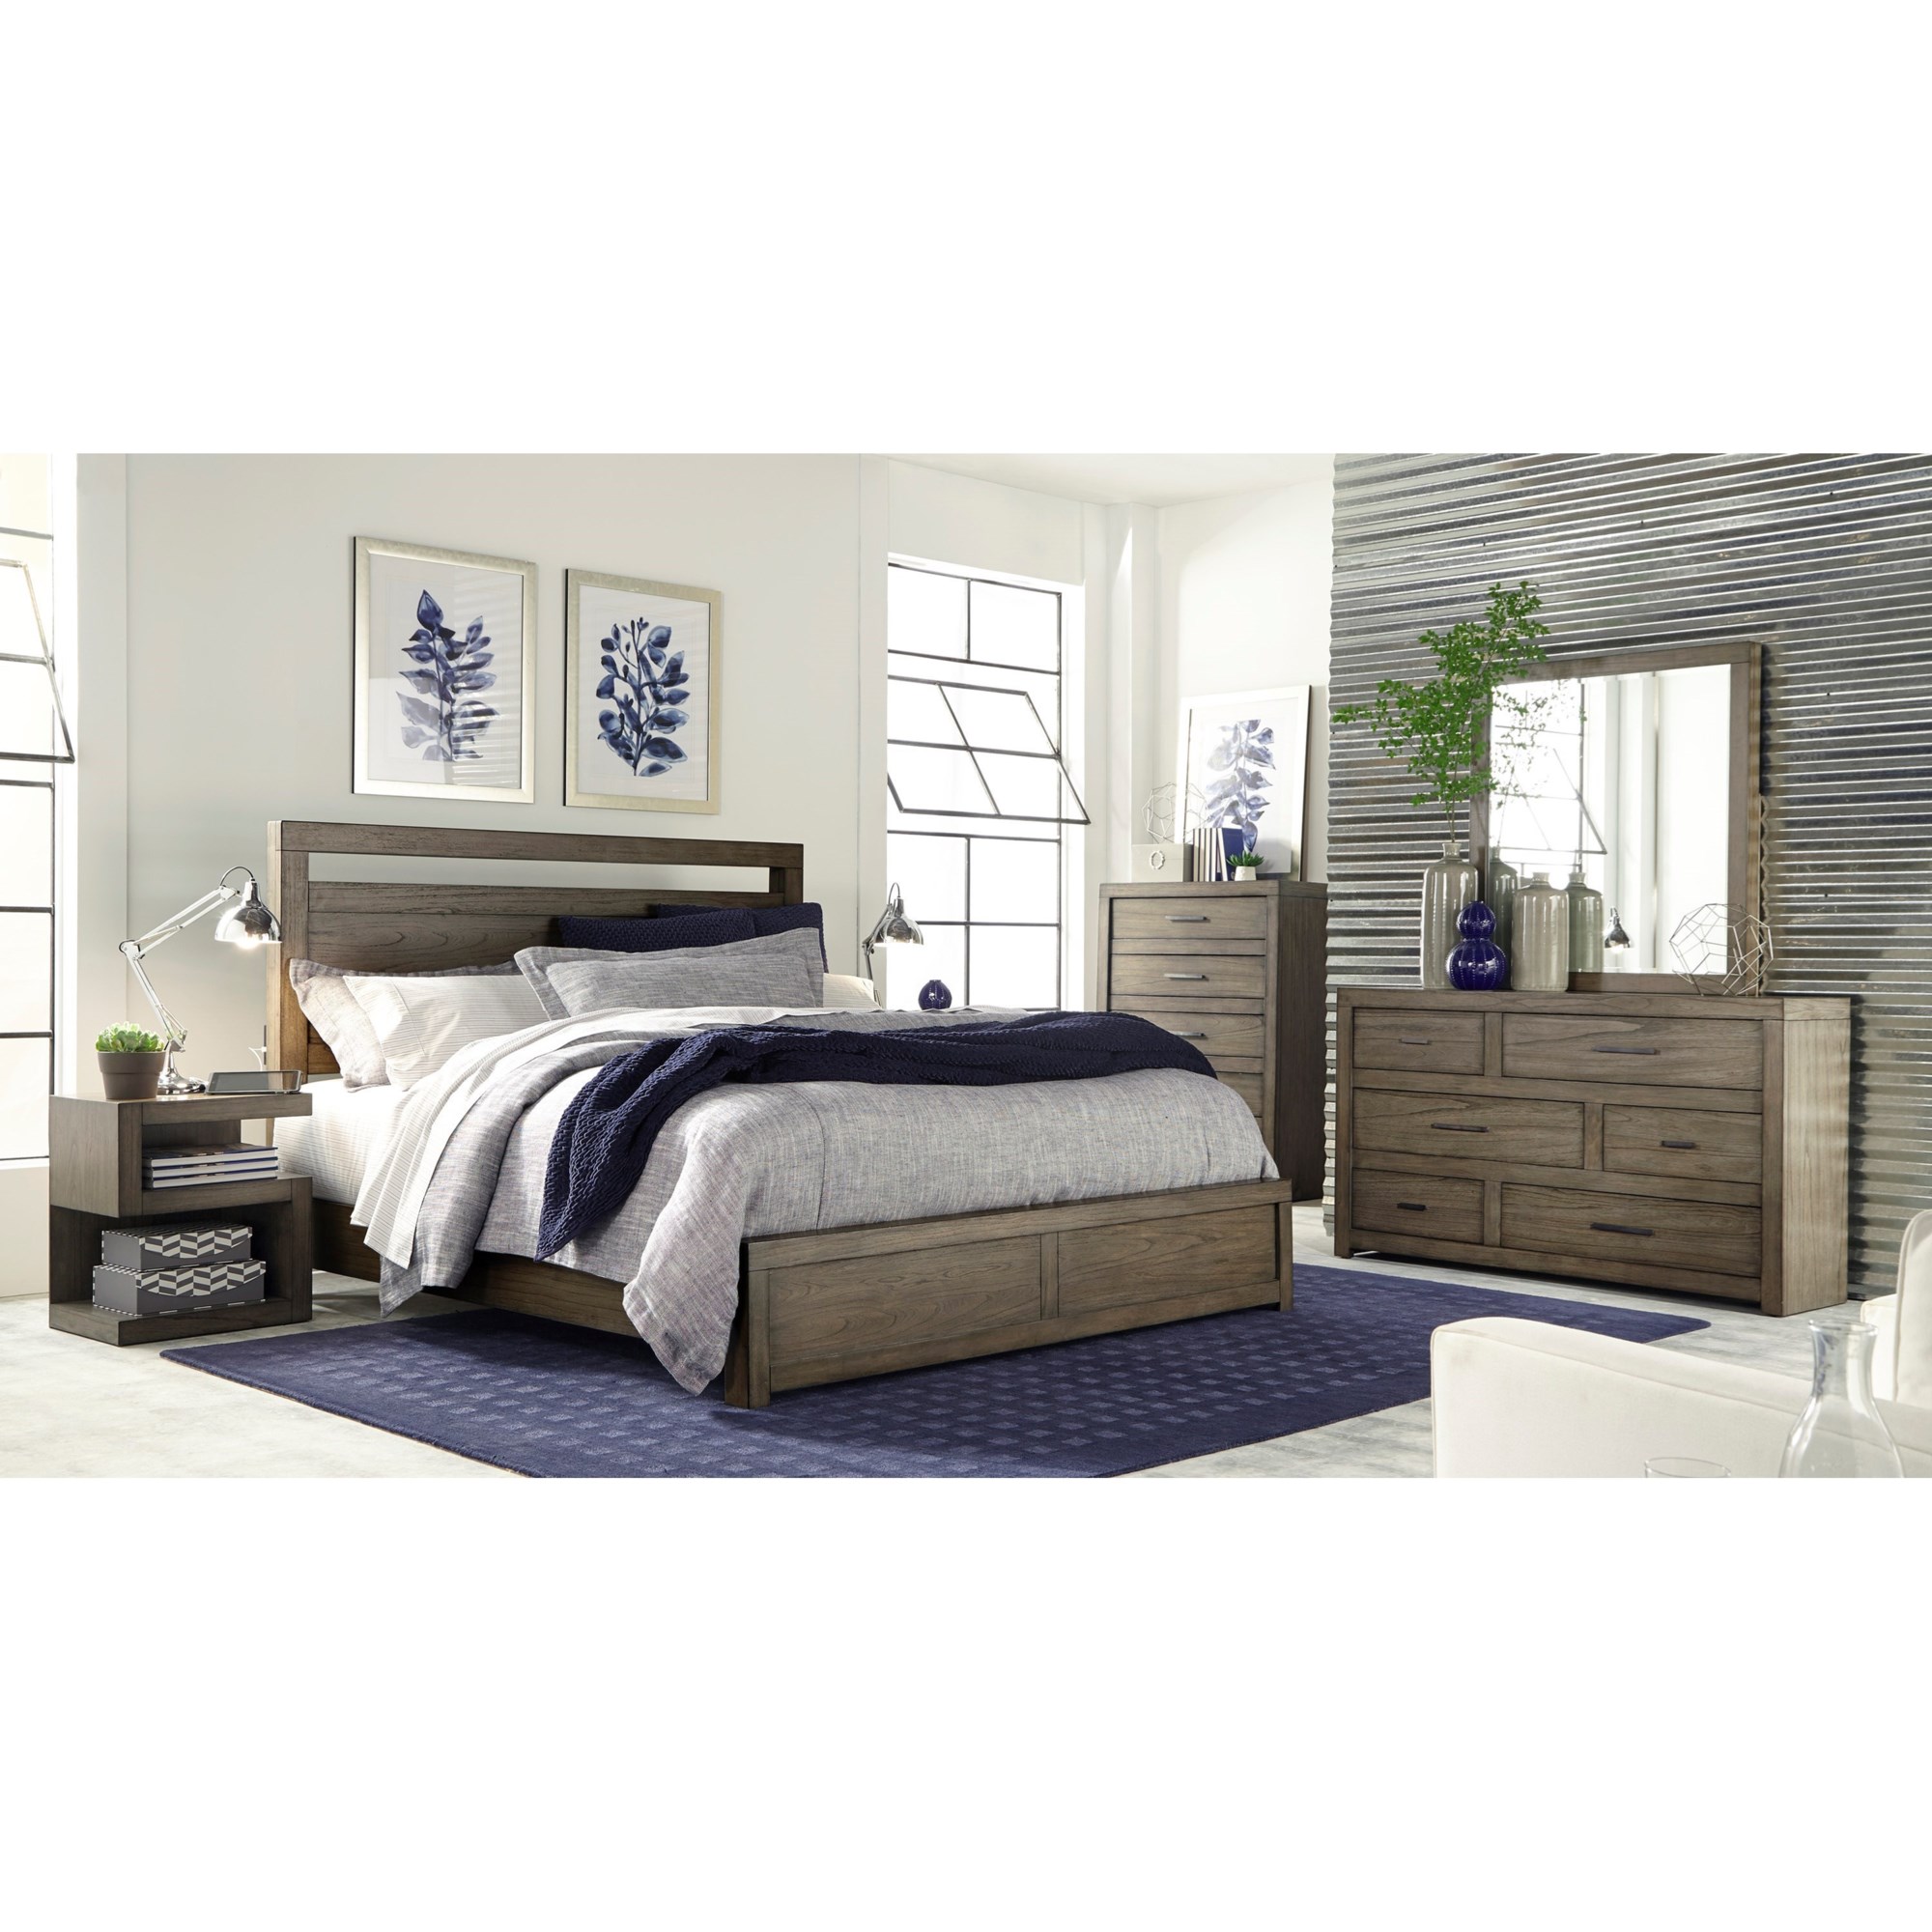 Aspenhome Modern Loft PKG412402 Contemporary Queen Panel Bed with Dual USB  Ports | Belfort Furniture | Bed - Platform or Low Profile Bed